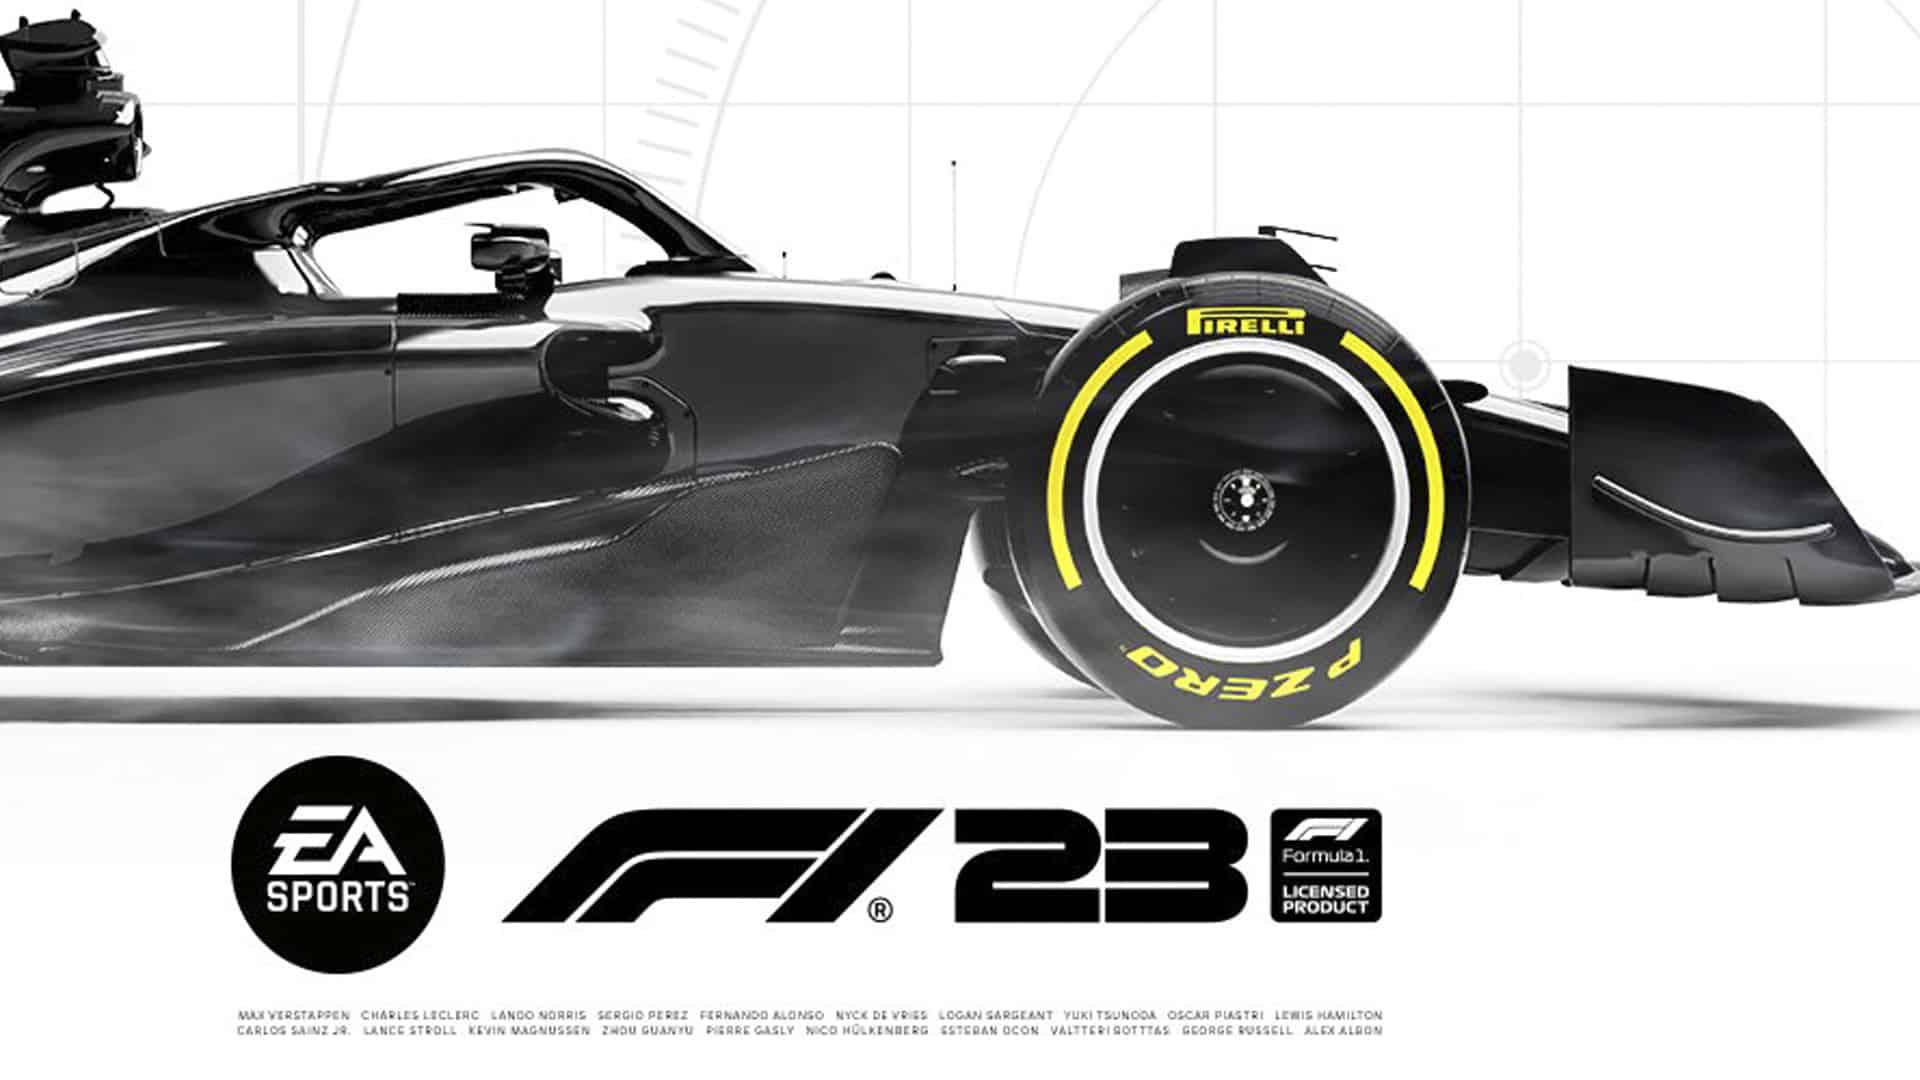 be Traxion SPORTS F1 EA SPORTS called 23 EA | F1 will 23